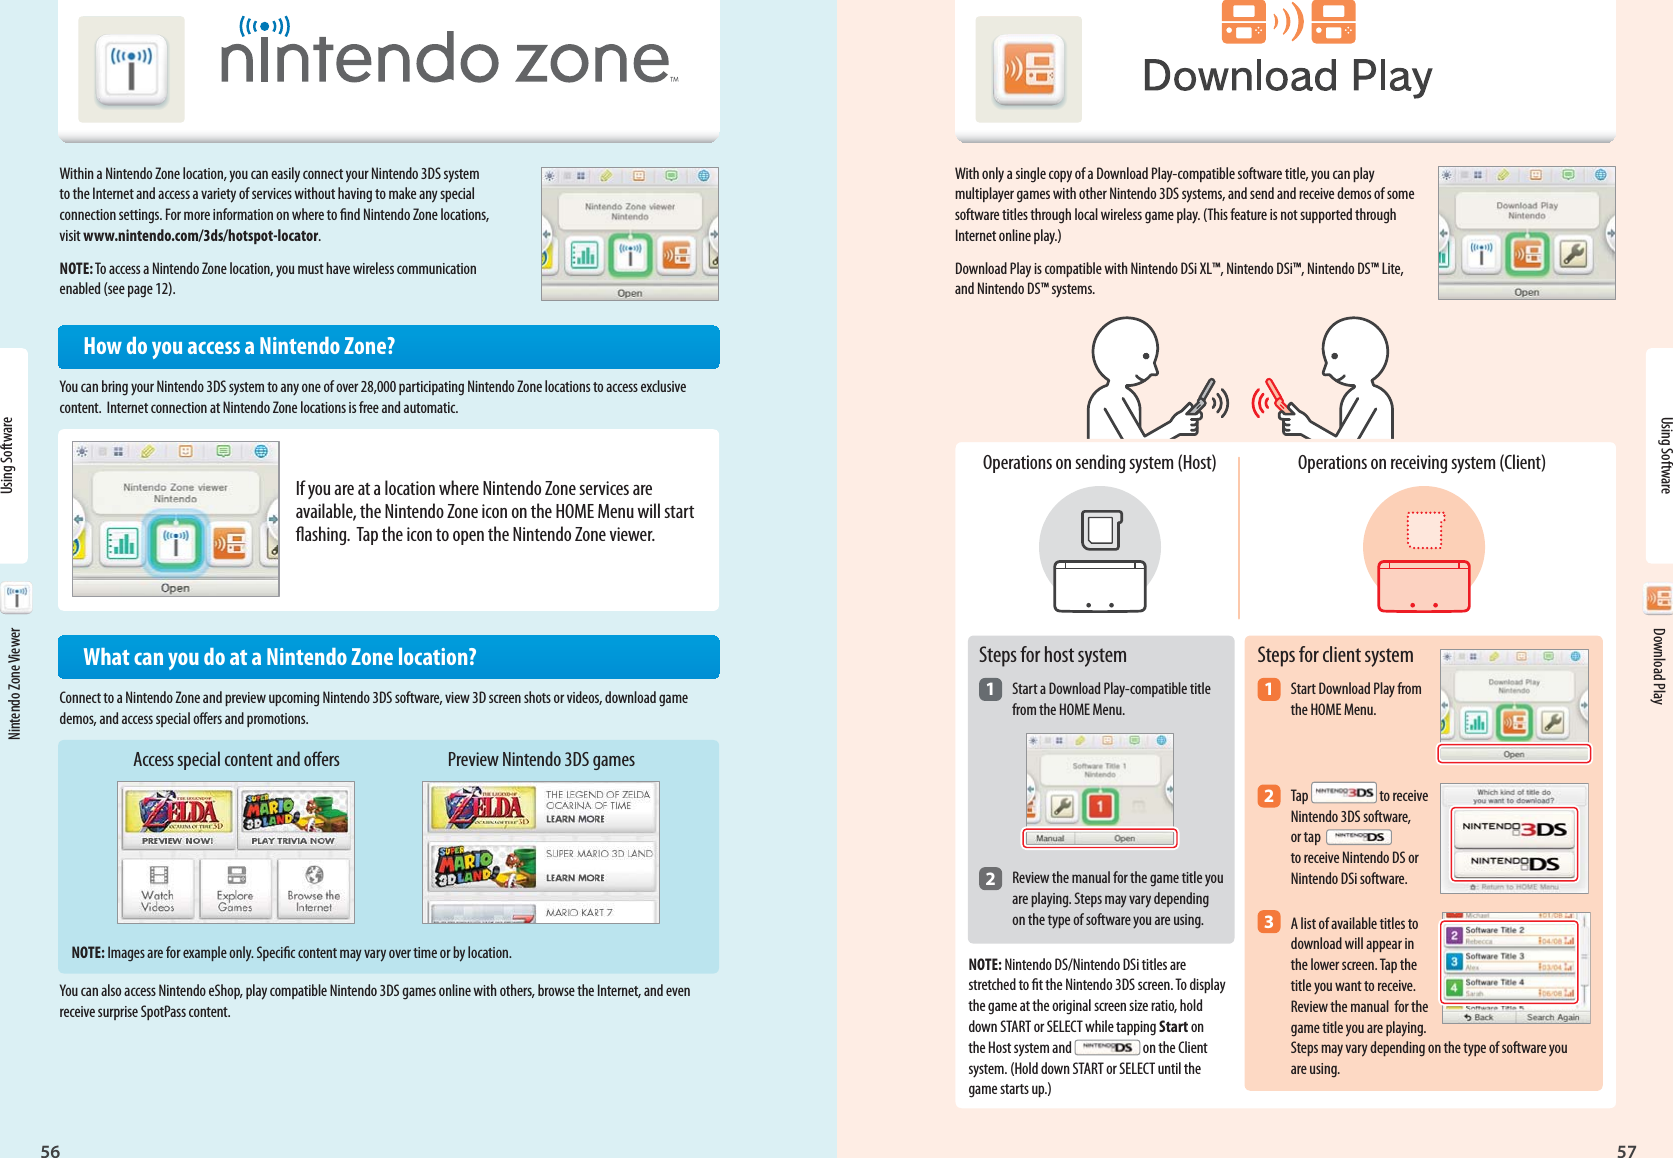 Nintendo Zone56Using Software57Download PlayAccess special content and oers Preview Nintendo 3DS gamesUsing Software Nintendo Zone Viewer Download PlayWith only a single copy of a Download Play-compatible software title, you can play multiplayer games with other Nintendo 3DS systems, and send and receive demos of some software titles through local wireless game play. (This feature is not supported through Internet online play.)Download Play is compatible with Nintendo DSi XL™, Nintendo DSi™, Nintendo DS™ Lite, and Nintendo DS™ systems.Within a Nintendo Zone location, you can easily connect your Nintendo 3DS system to the Internet and access a variety of services without having to make any special connection settings. For more information on where to nd Nintendo Zone locations, visit www.nintendo.com/3ds/hotspot-locator.NOTE: To access a Nintendo Zone location, you must have wireless communication enabled (see page 12).How do you access a Nintendo Zone?You can bring your Nintendo 3DS system to any one of over 28,000 participating Nintendo Zone locations to access exclusive content.  Internet connection at Nintendo Zone locations is free and automatic.If you are at a location where Nintendo Zone services are available, the Nintendo Zone icon on the HOME Menu will start ashing.  Tap the icon to open the Nintendo Zone viewer.  What can you do at a Nintendo Zone location?Connect to a Nintendo Zone and preview upcoming Nintendo 3DS software, view 3D screen shots or videos, download game demos, and access special oers and promotions.NOTE: Images are for example only. Specic content may vary over time or by location.You can also access Nintendo eShop, play compatible Nintendo 3DS games online with others, browse the Internet, and even receive surprise SpotPass content.Steps for host system1 Start a Download Play-compatible title  from the HOME Menu.2 Review the manual for the game title you  are playing. Steps may vary depending   on the type of software you are using.Operations on sending system (Host)Steps for client system1 Start Download Play from  the HOME Menu.2 Tap   to receive  Nintendo 3DS software,   or tap   to receive Nintendo DS or  Nintendo DSi software.3 A list of available titles to  download will appear in   the lower screen. Tap the   title you want to receive.   Review the manual  for the   game title you are playing.   Steps may vary depending on the type of software you  are using.Operations on receiving system (Client)NOTE: Nintendo DS/Nintendo DSi titles are stretched to t the Nintendo 3DS screen. To display the game at the original screen size ratio, hold down START or SELECT while tapping Start on the Host system and   on the Client system. (Hold down START or SELECT until the game starts up.)